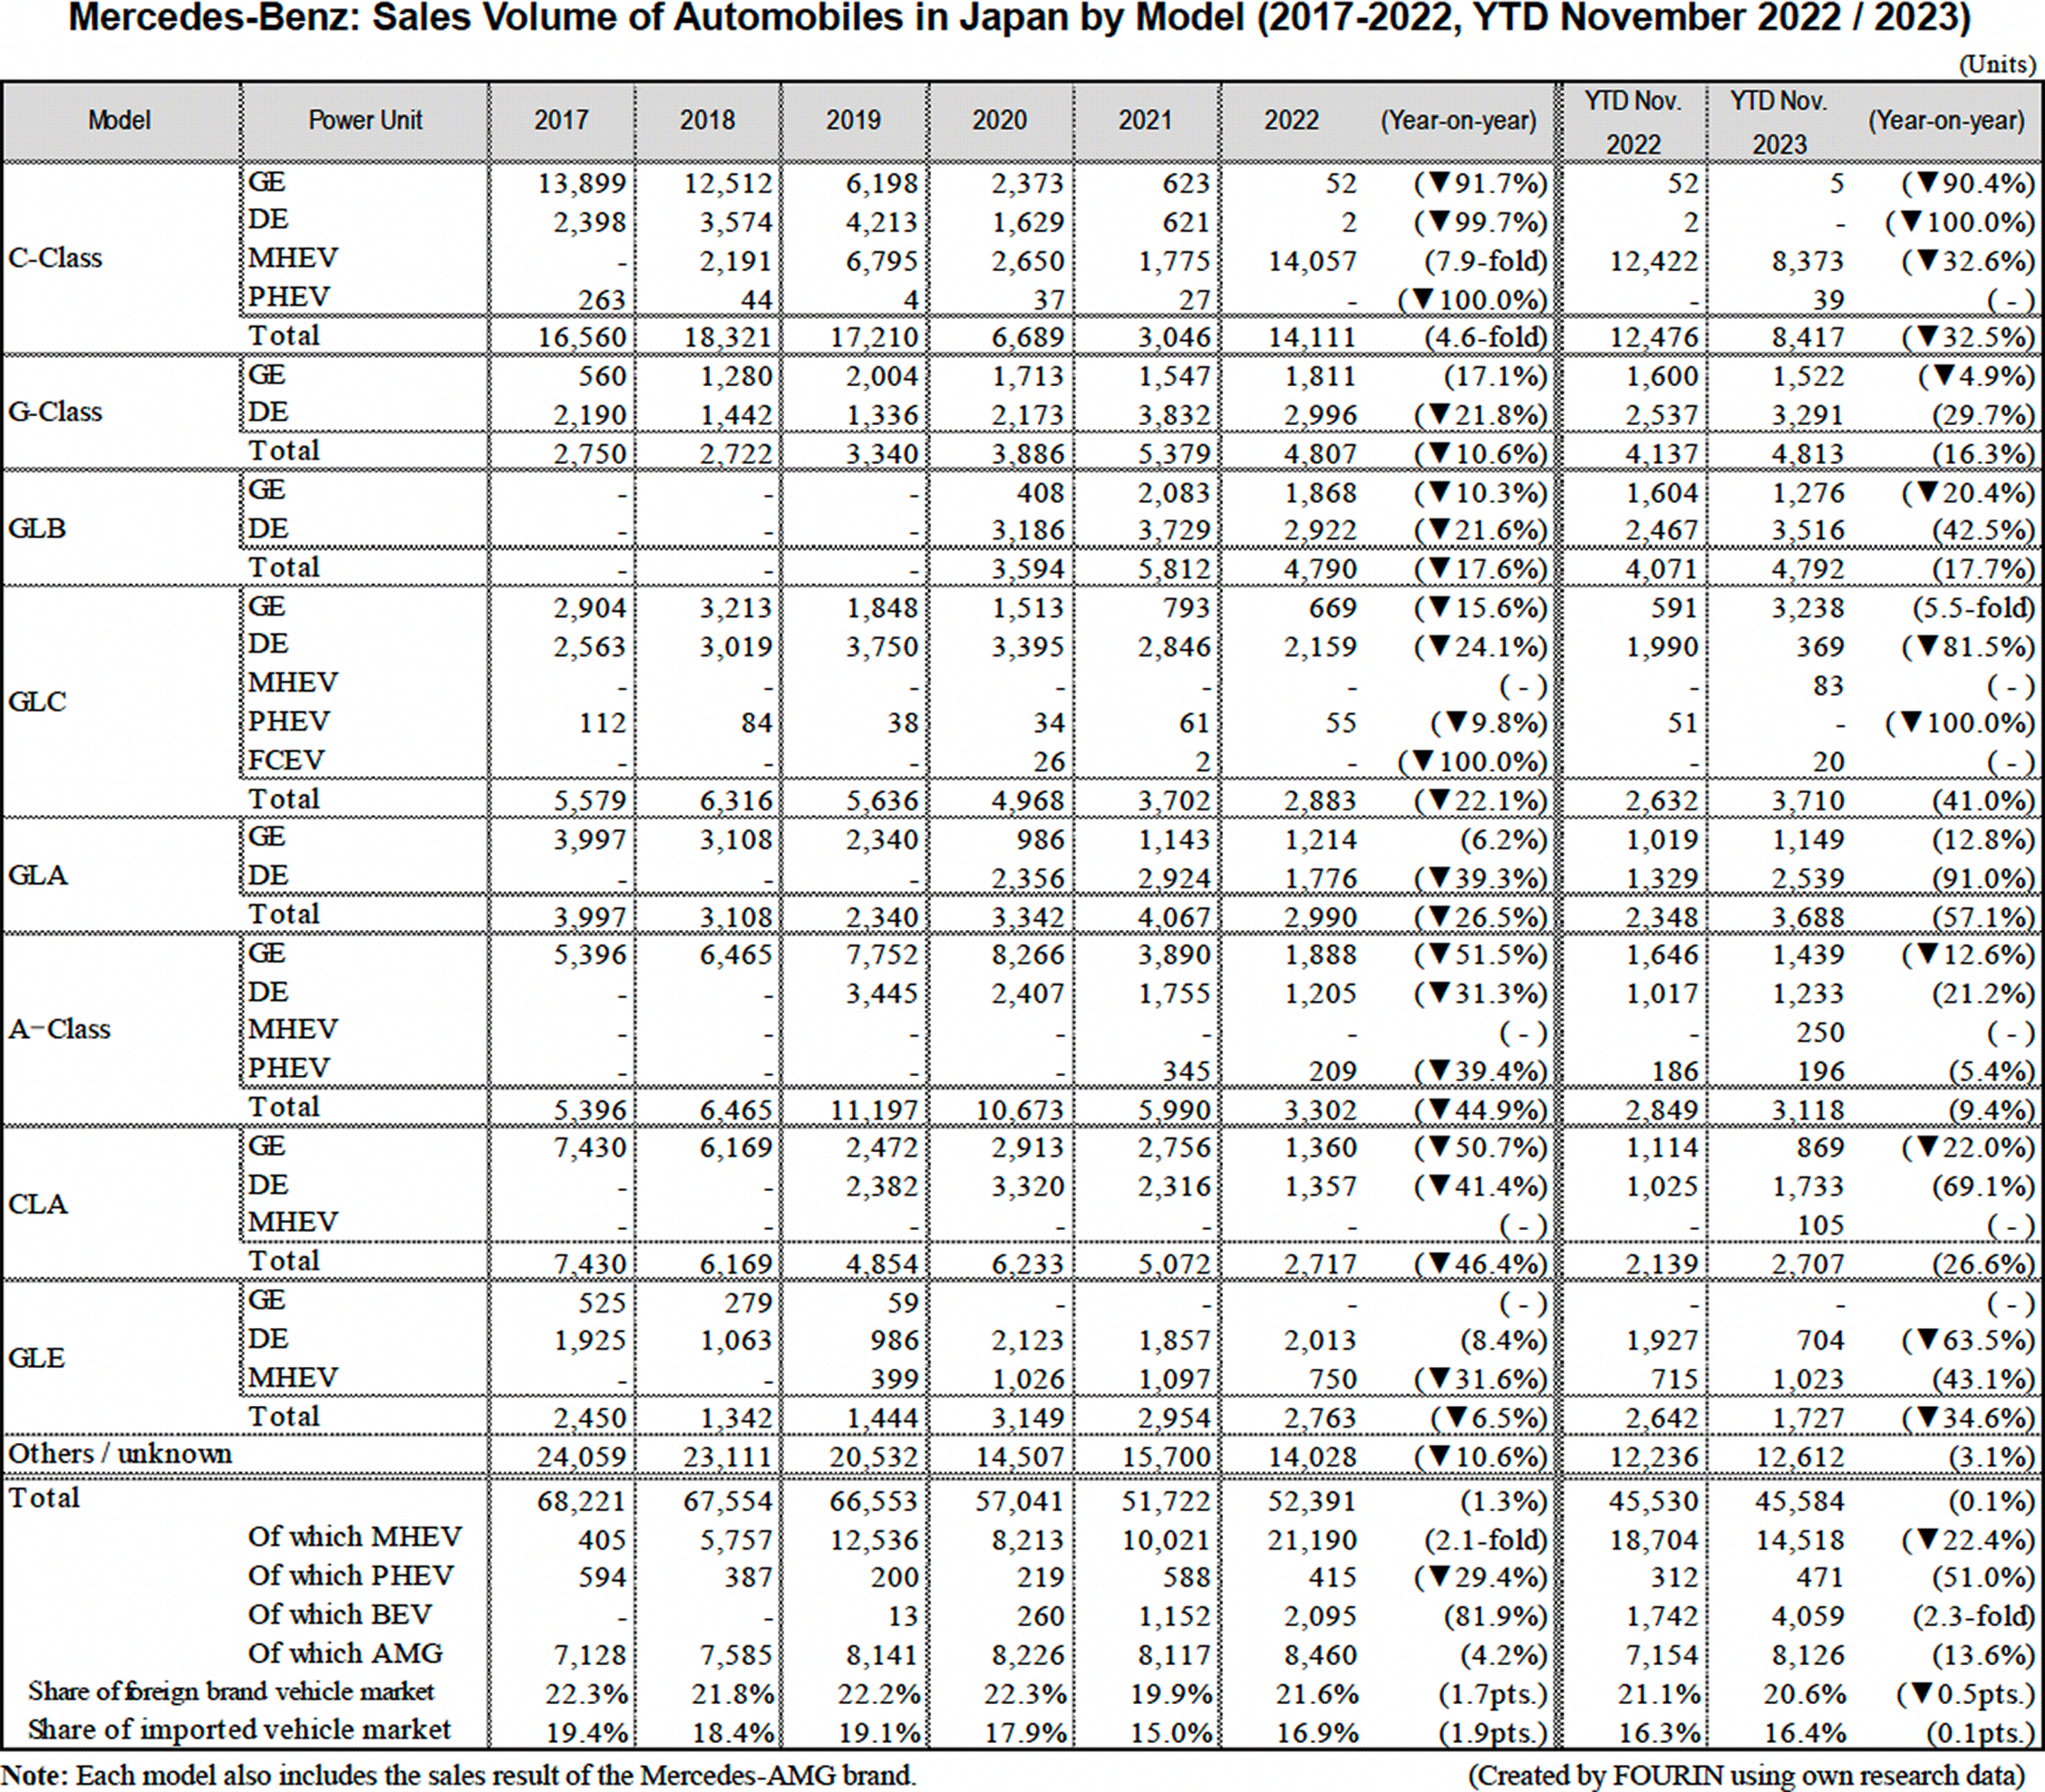 Table Data: Mercedes-Benz: Sales Volume of Automobiles in Japan by Model (2017-2022, YTD November 2022 / 2023)